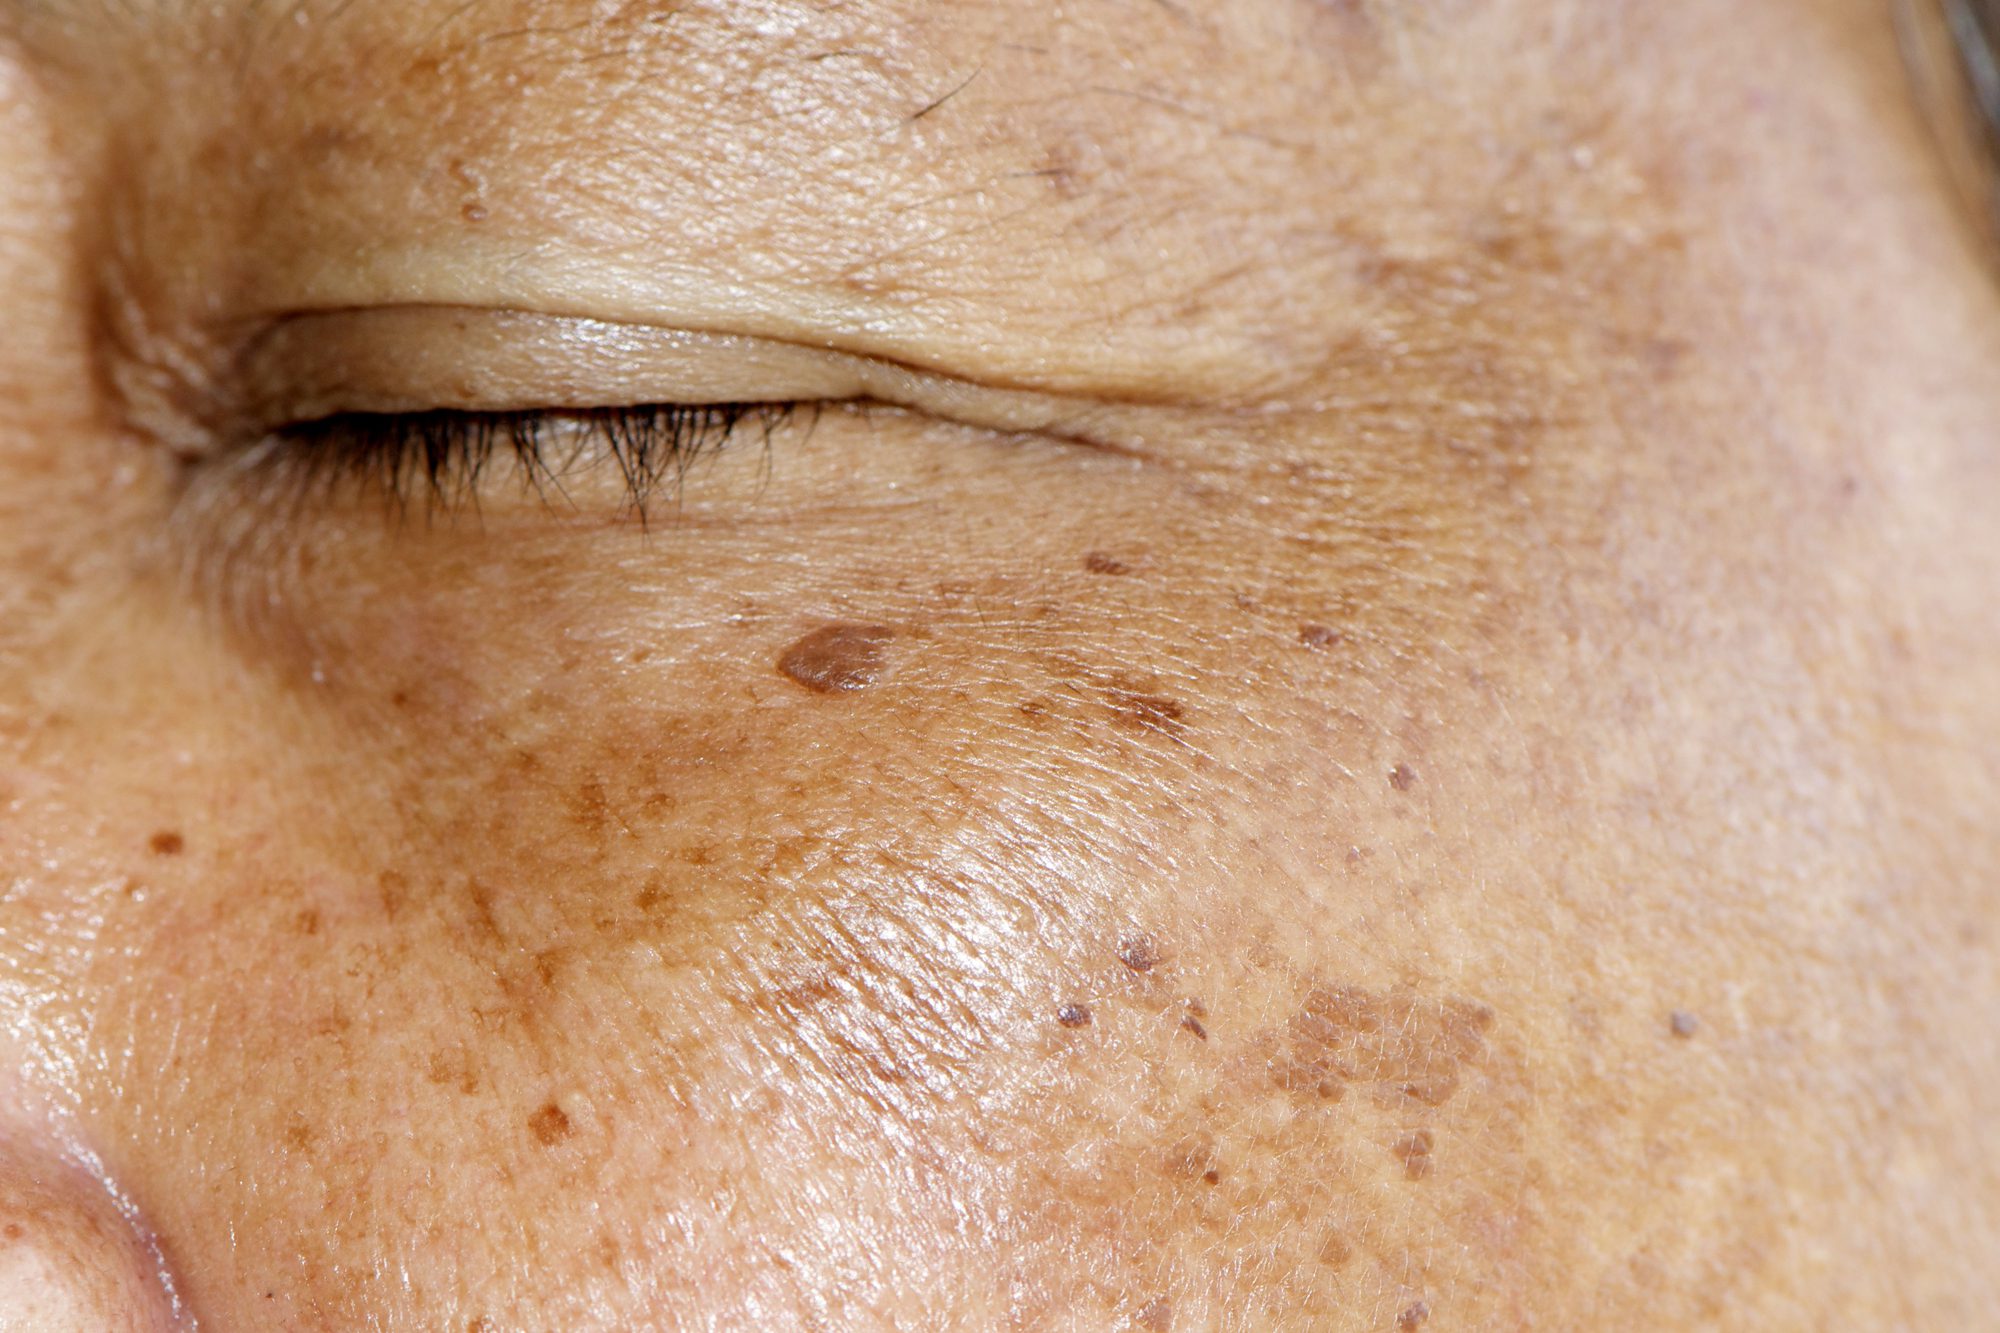 Age Spots are brown or black blemishes on the skin, appearing due to the natural aging process or sun exposure.